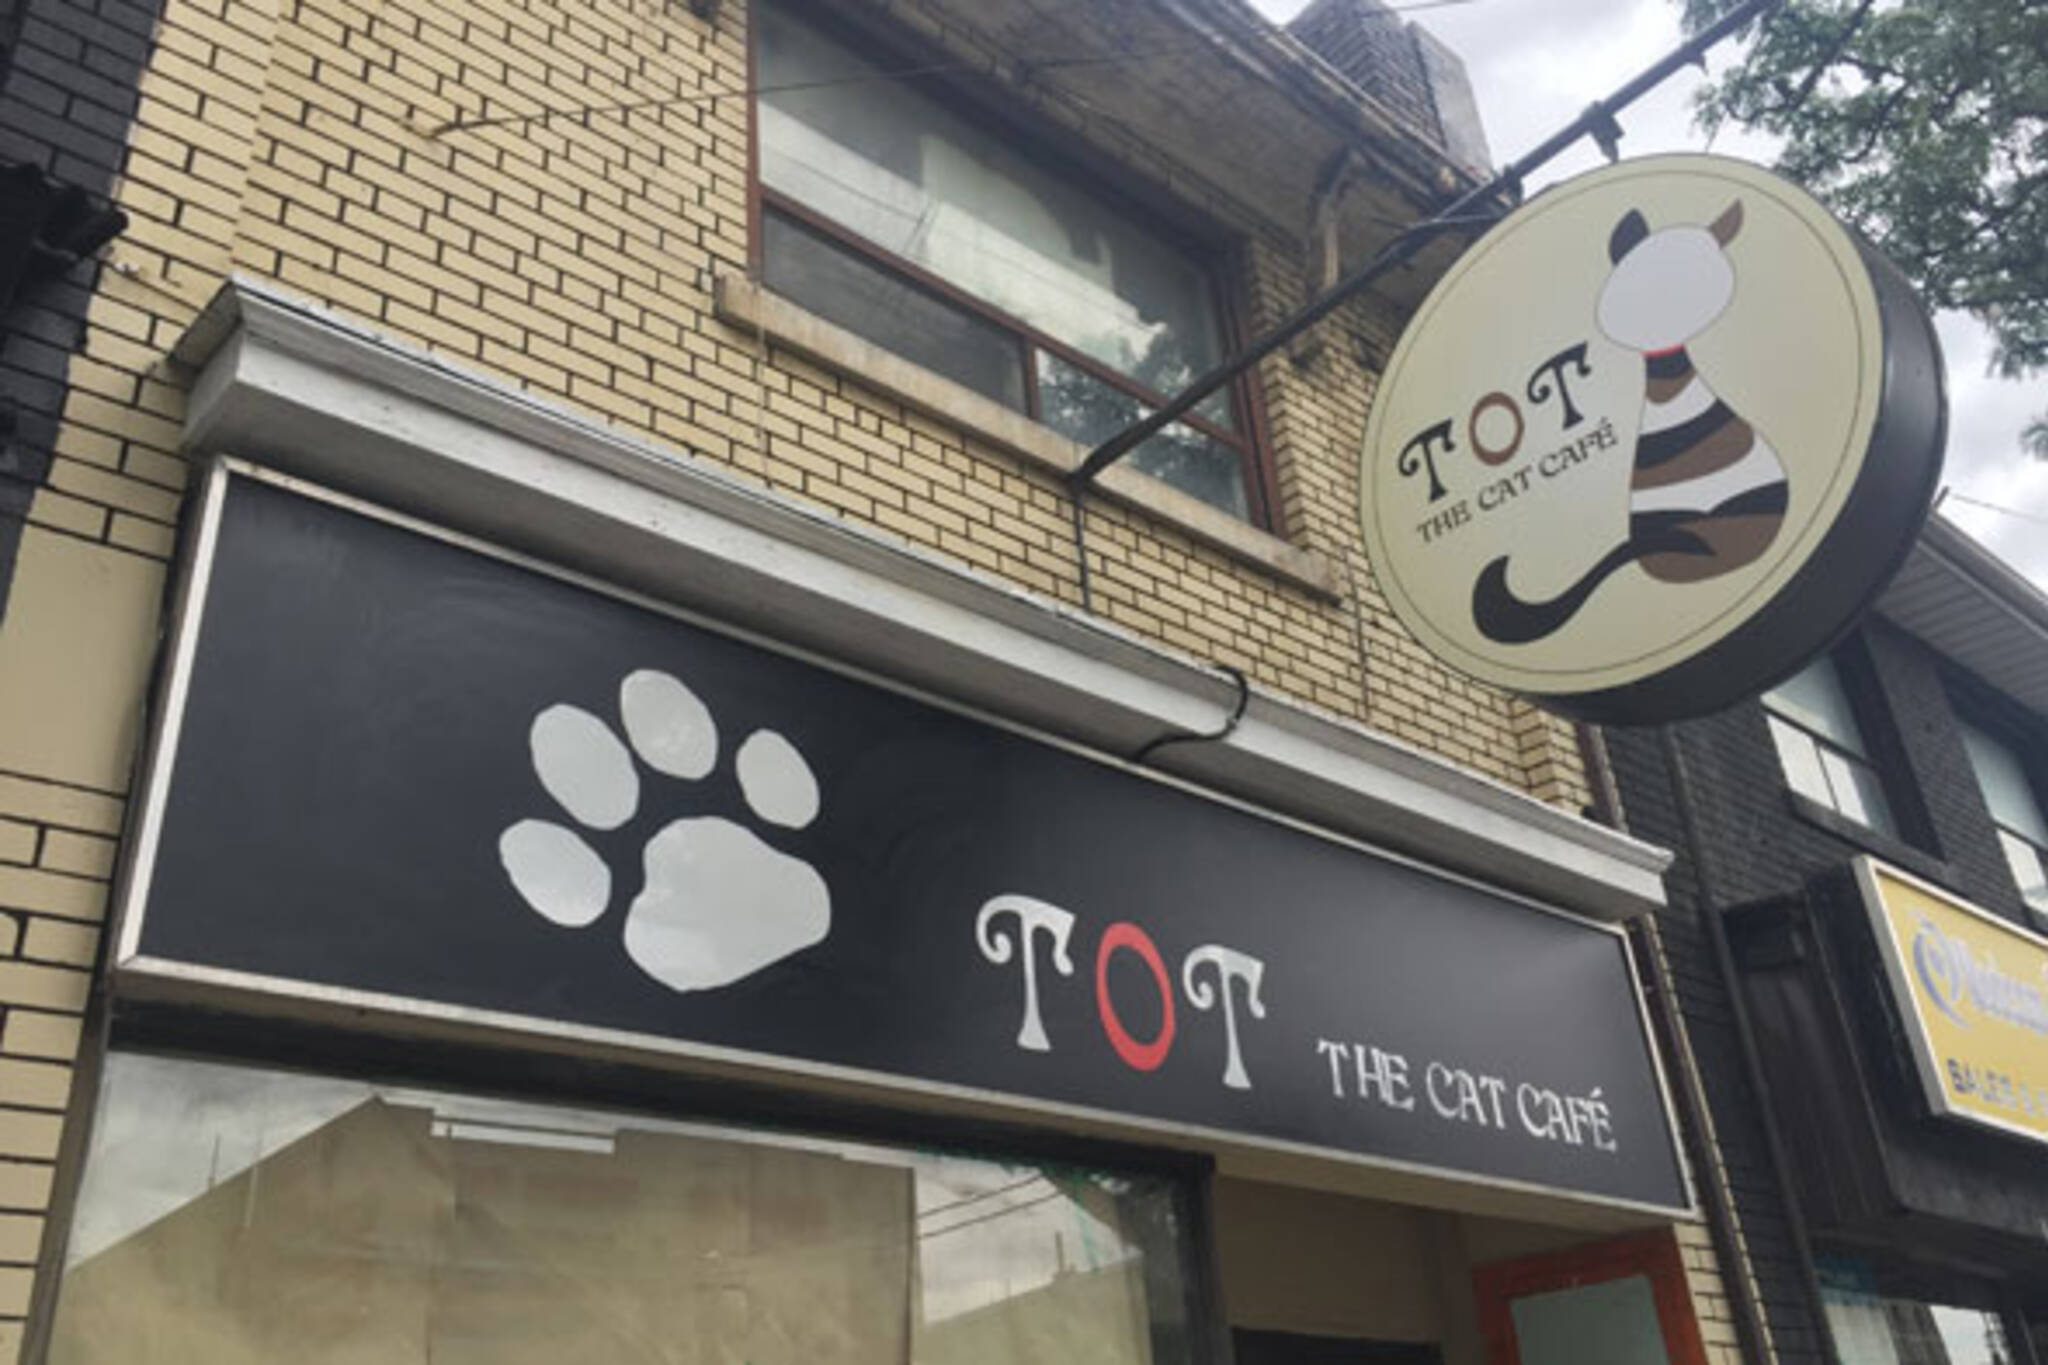  Toronto  s first cat  cafe  opening next month